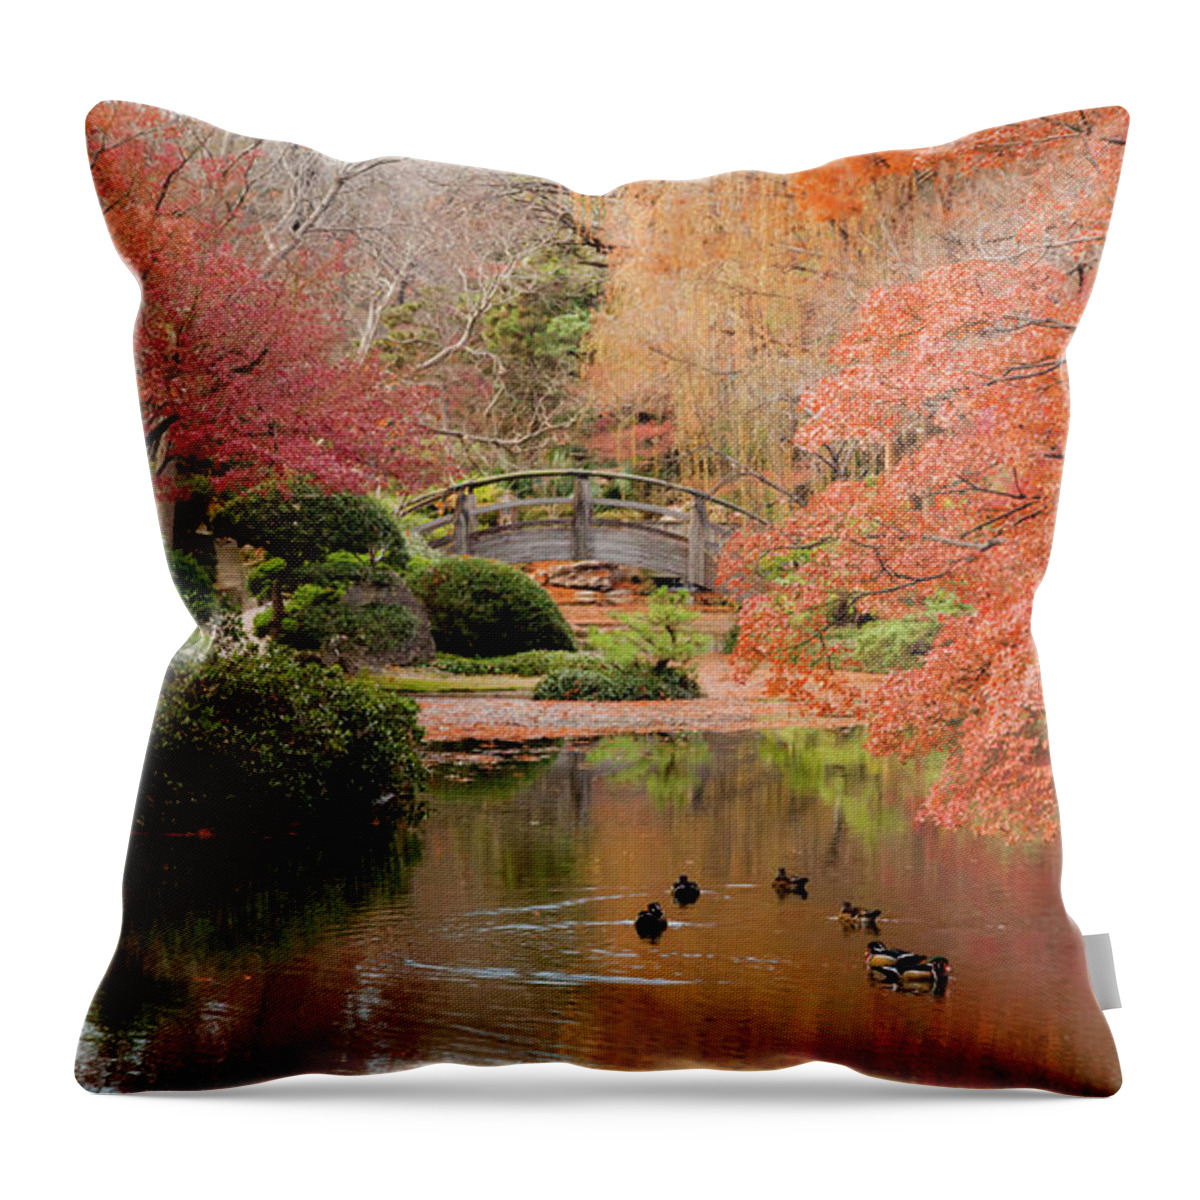 Ducks Throw Pillow featuring the photograph Ducks in the Pond by Iris Greenwell